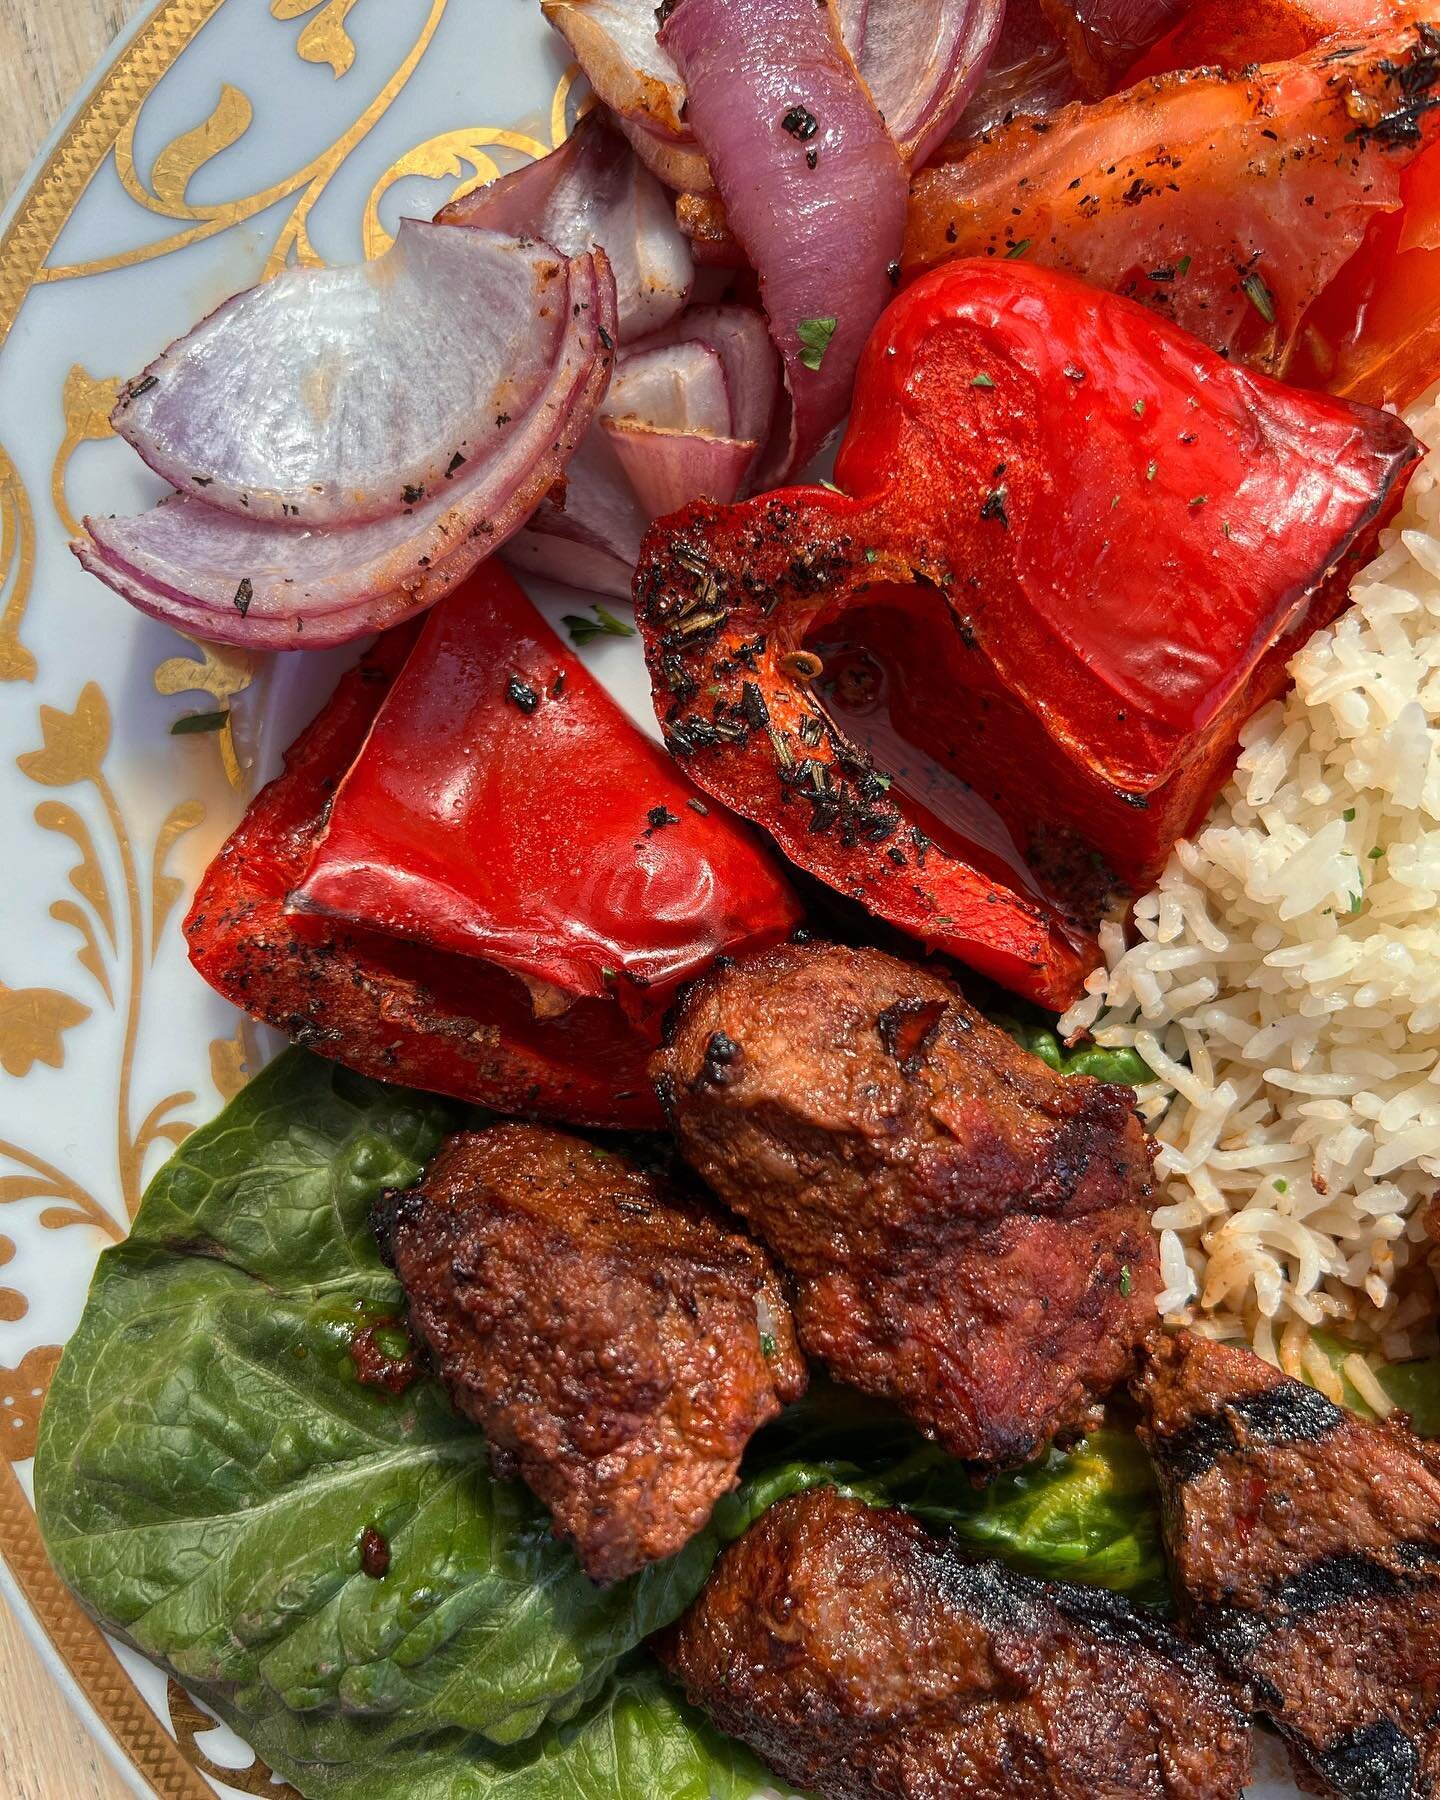 Shish Kebab at  Zamaan 🔥

Specially marinated beef with herb&amp;spices blend

8915 5th Avenue 
Brooklyn, NY 11209
718-333-5476